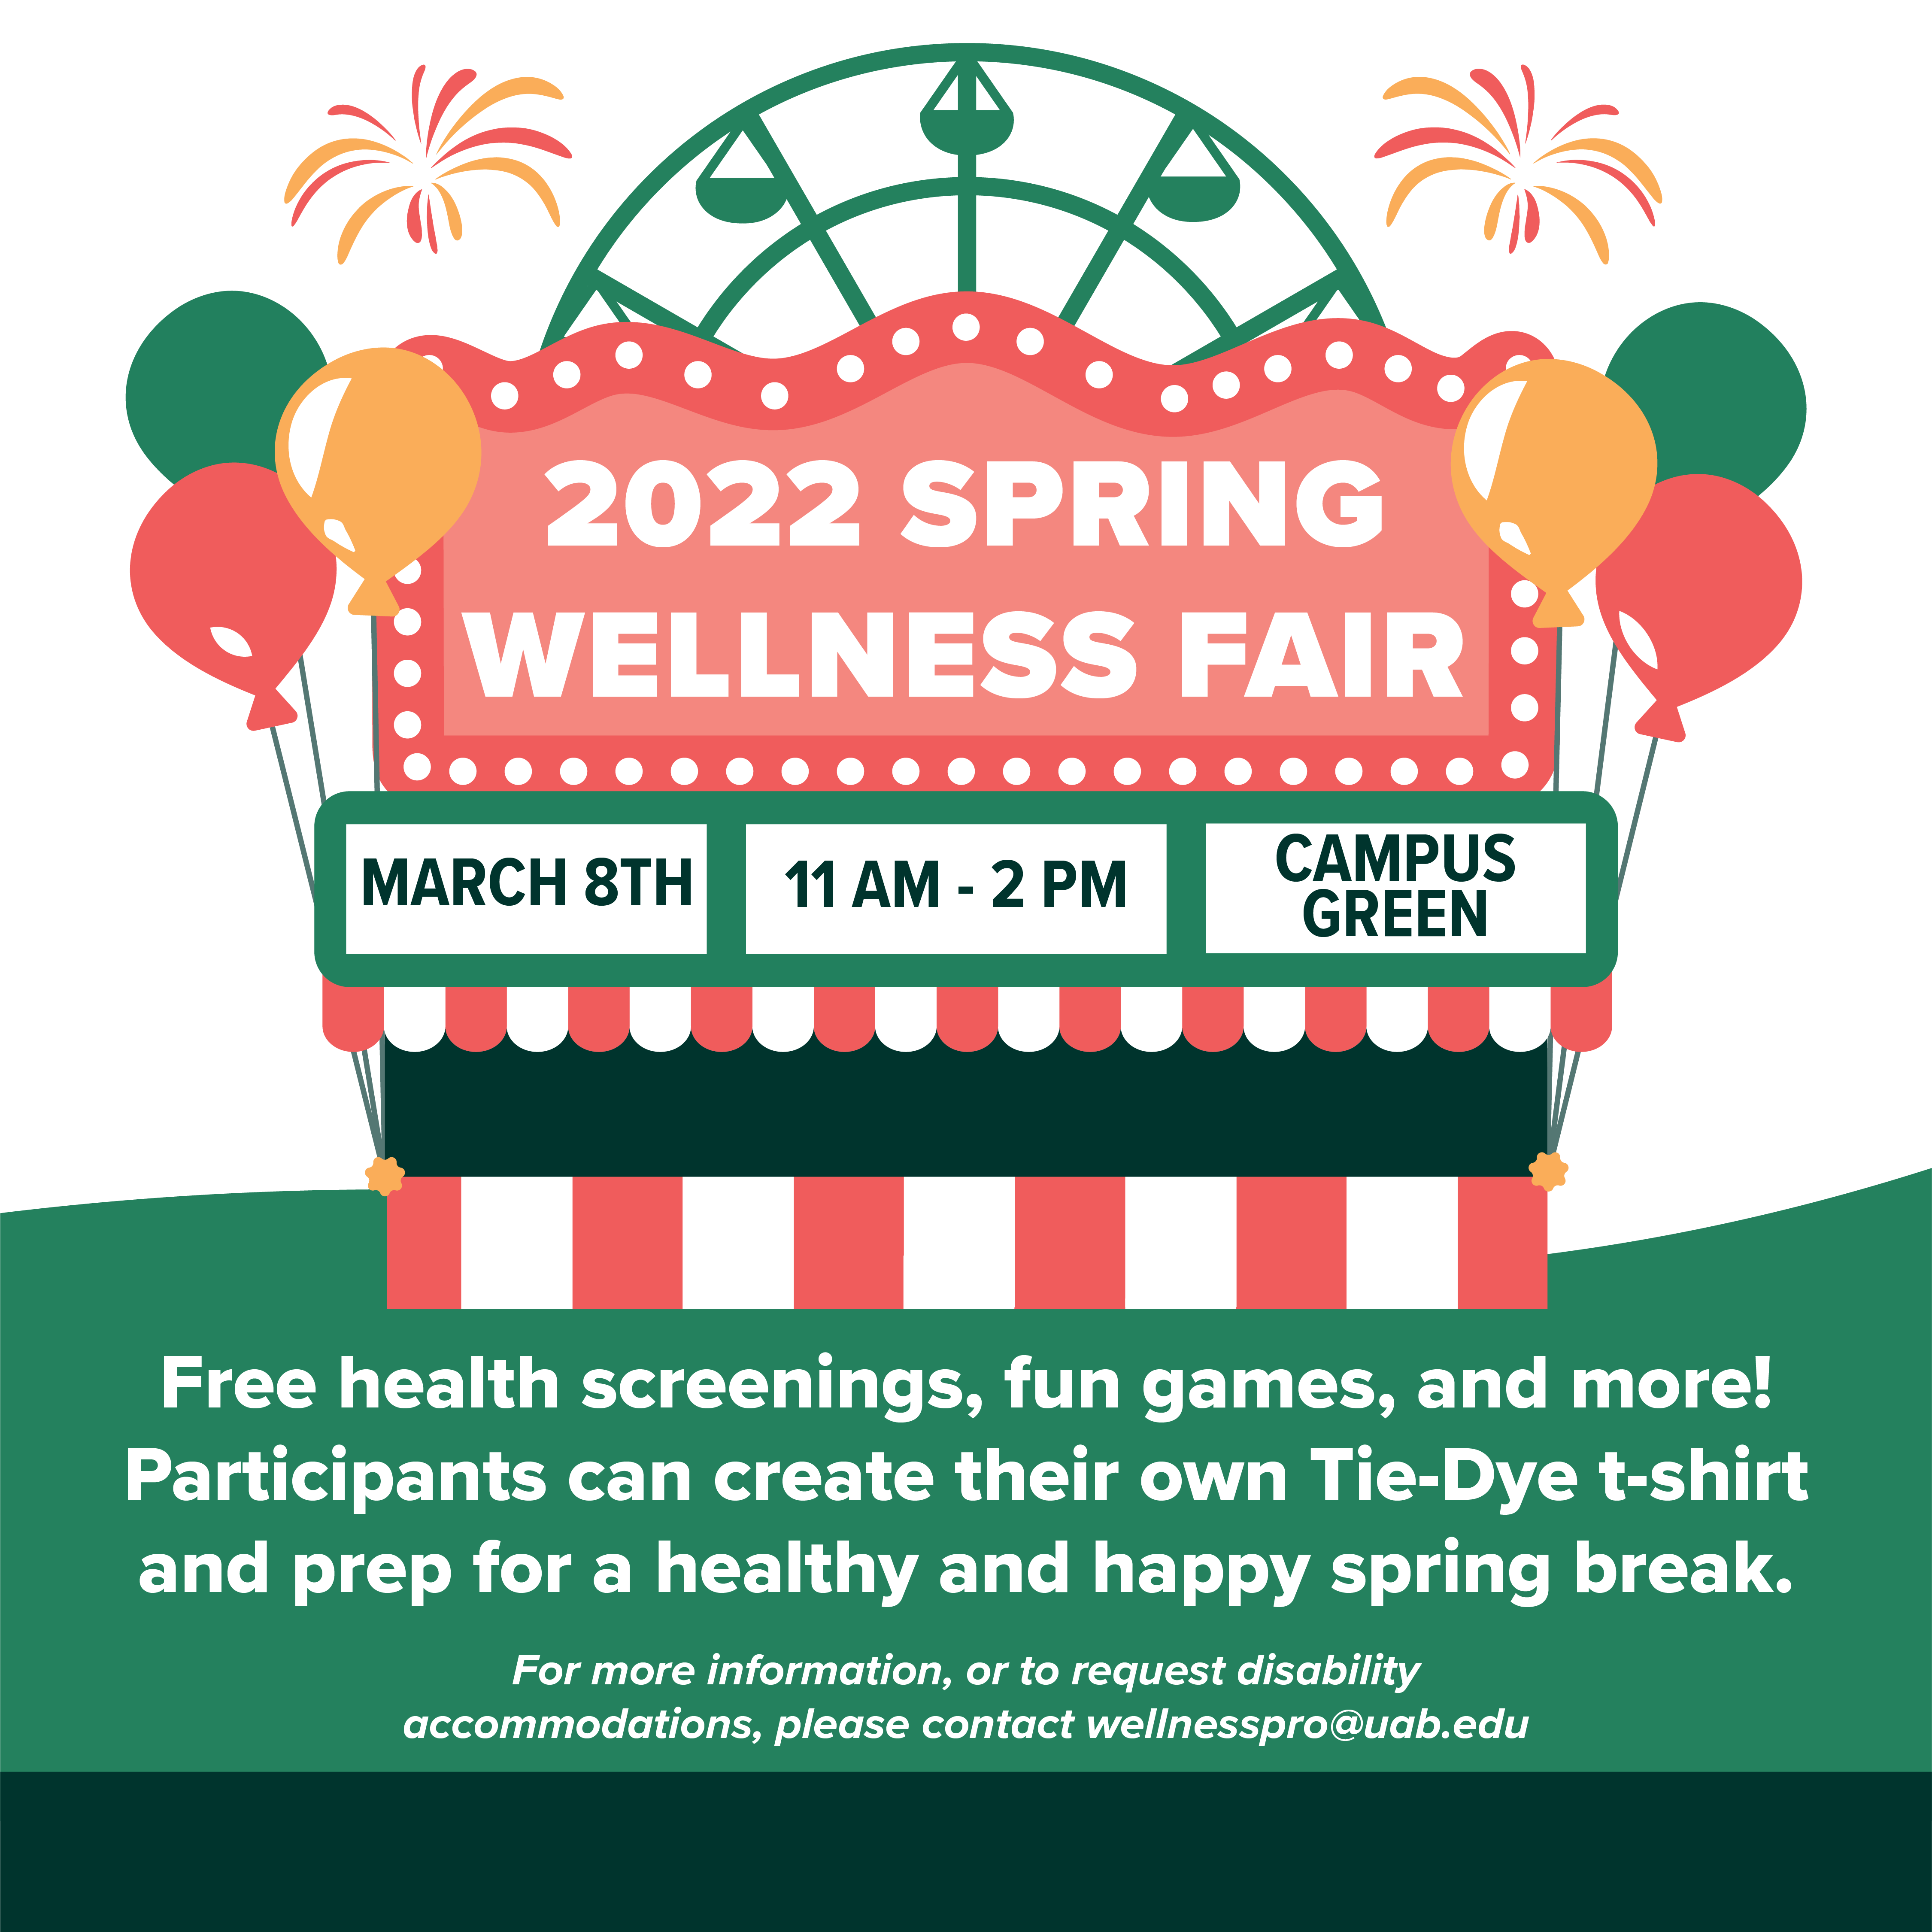 Free health screenings, tie-dye shirts, and more at the Spring 2022 Wellness Fair!